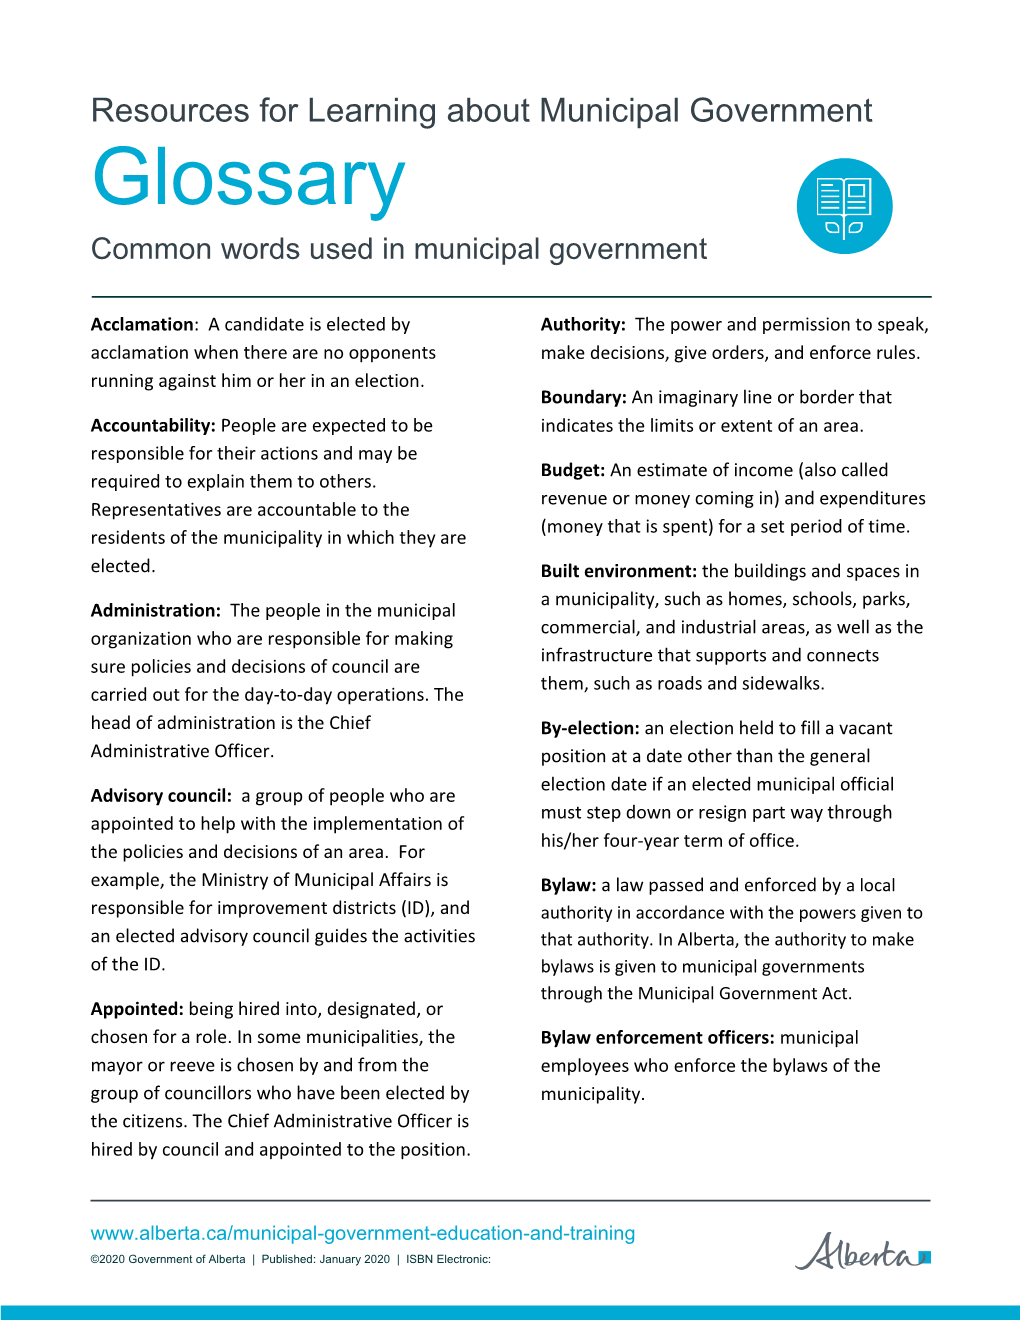 Glossary: Common Words Used in Municipal Government